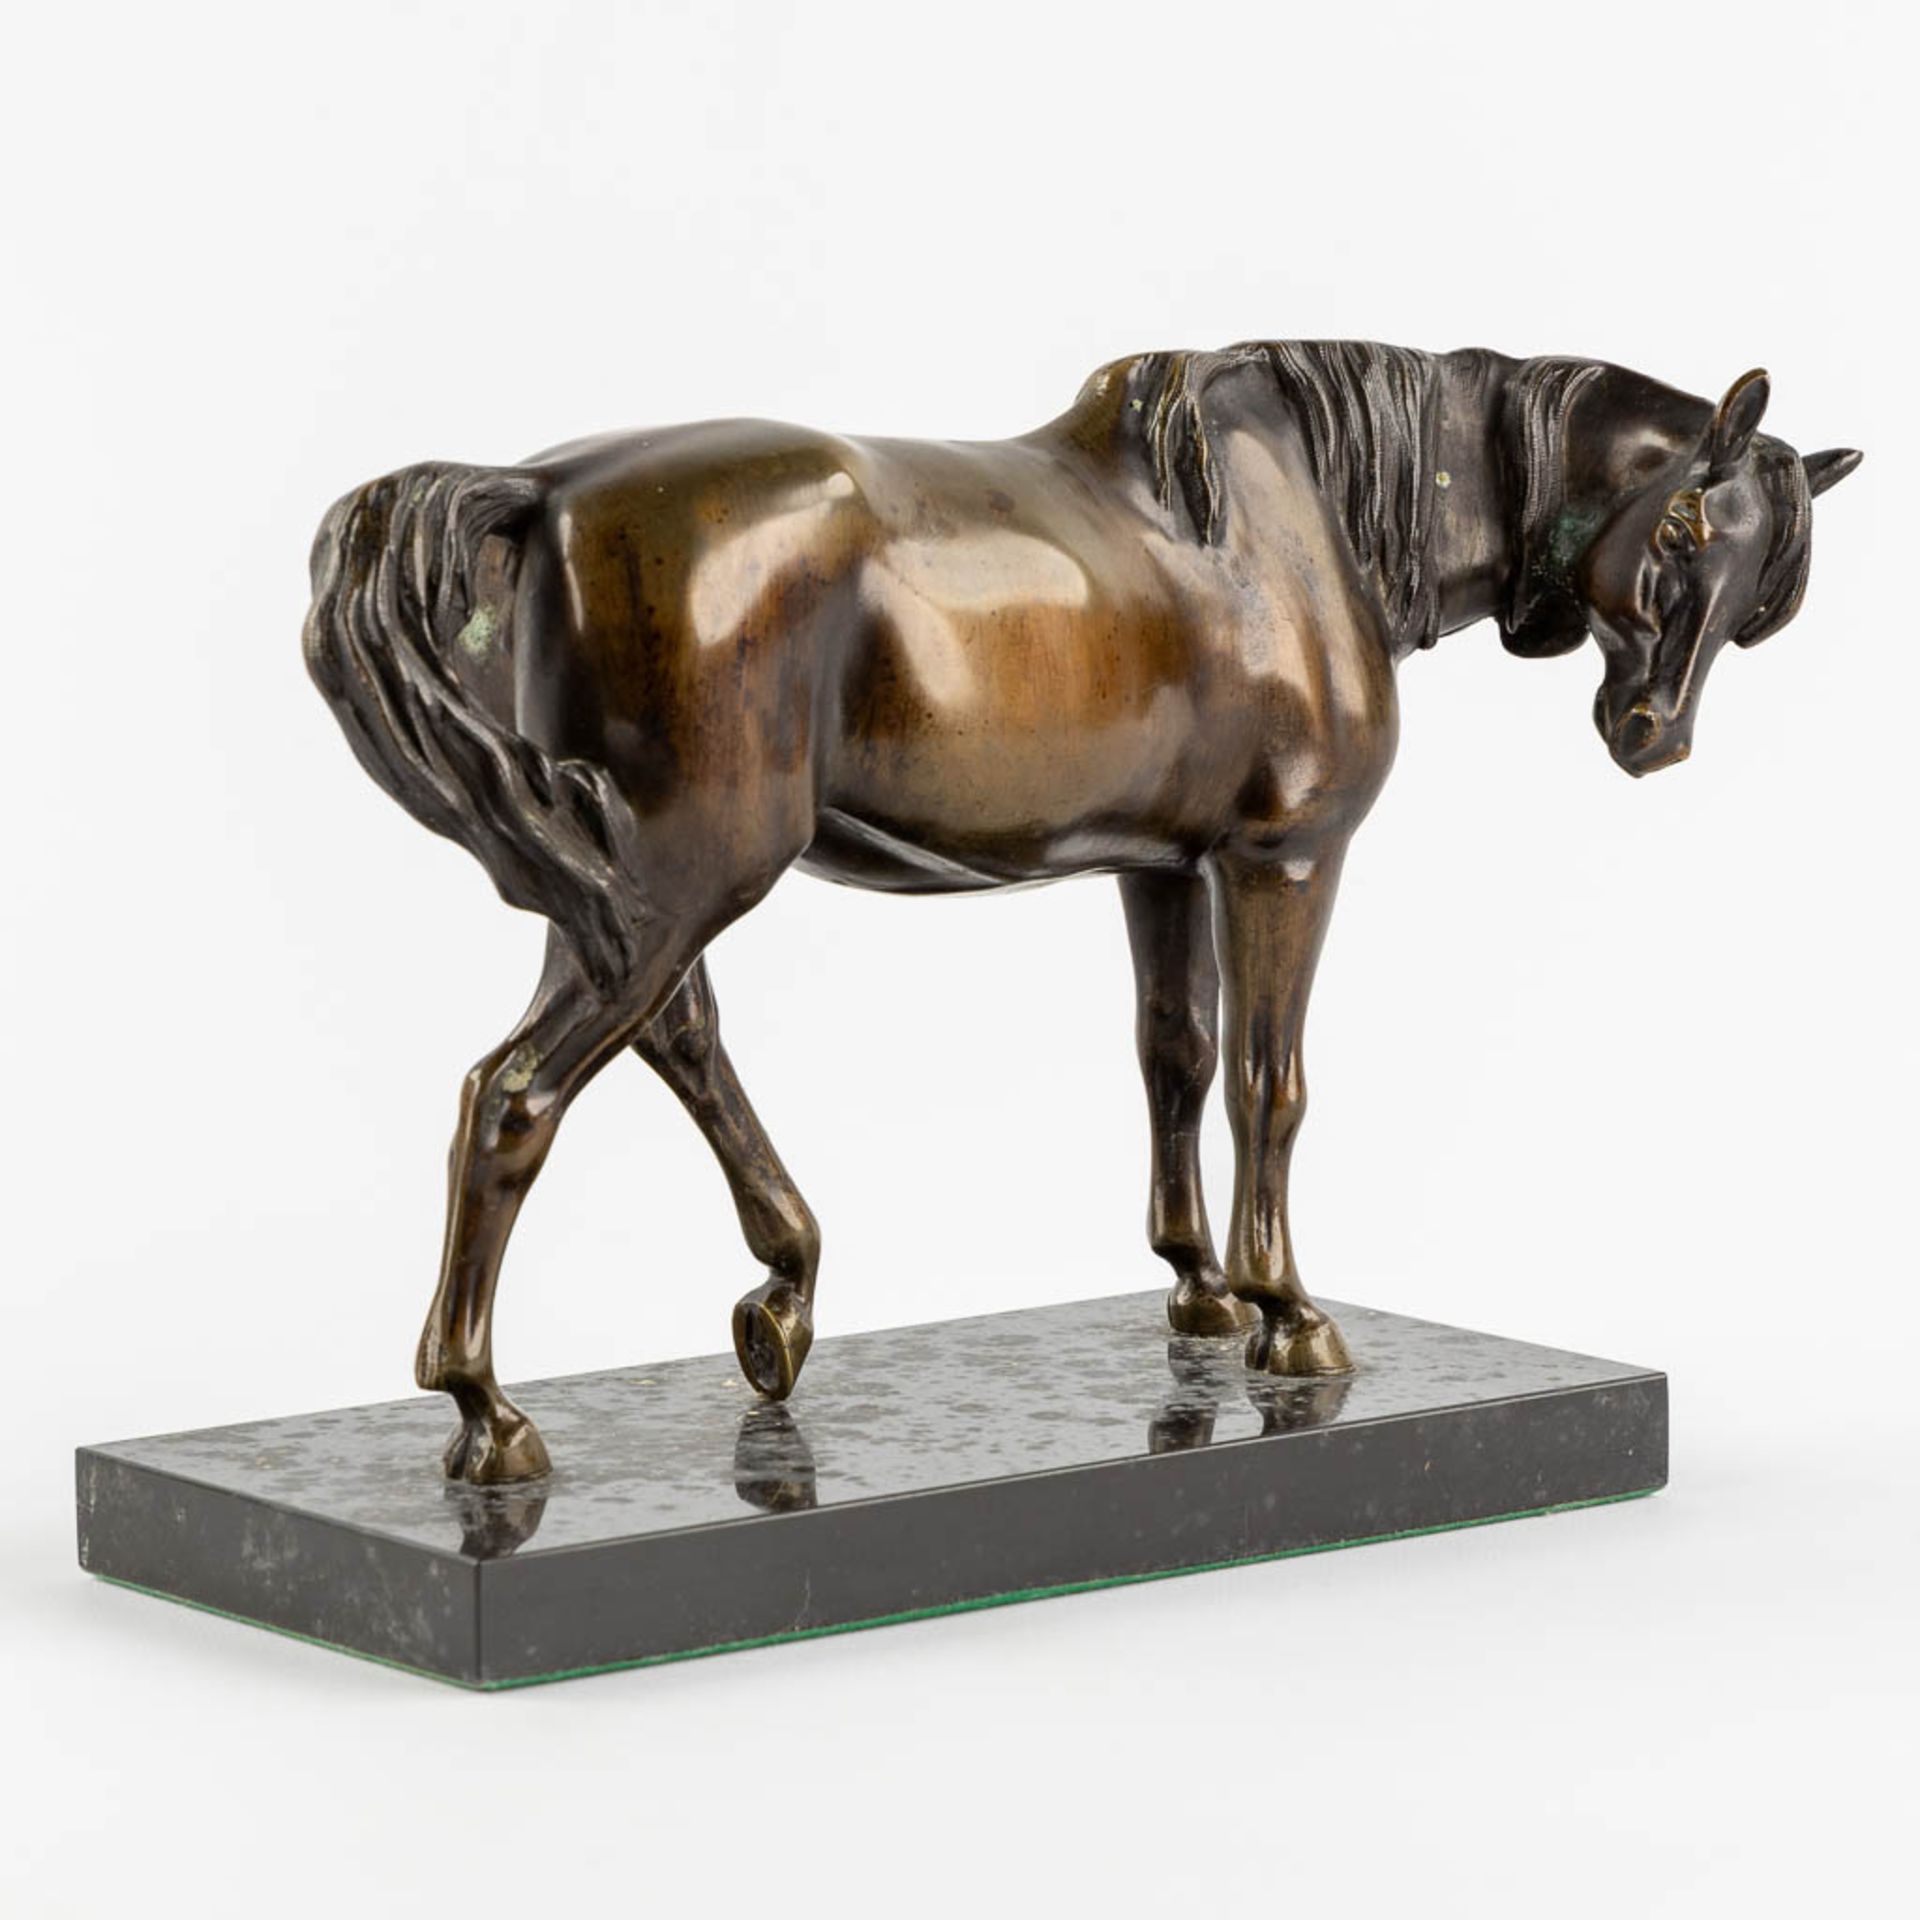 A patinated bronze figurine of a horse, black marble. (L:11 x W:27 x H:18 cm) - Image 3 of 9